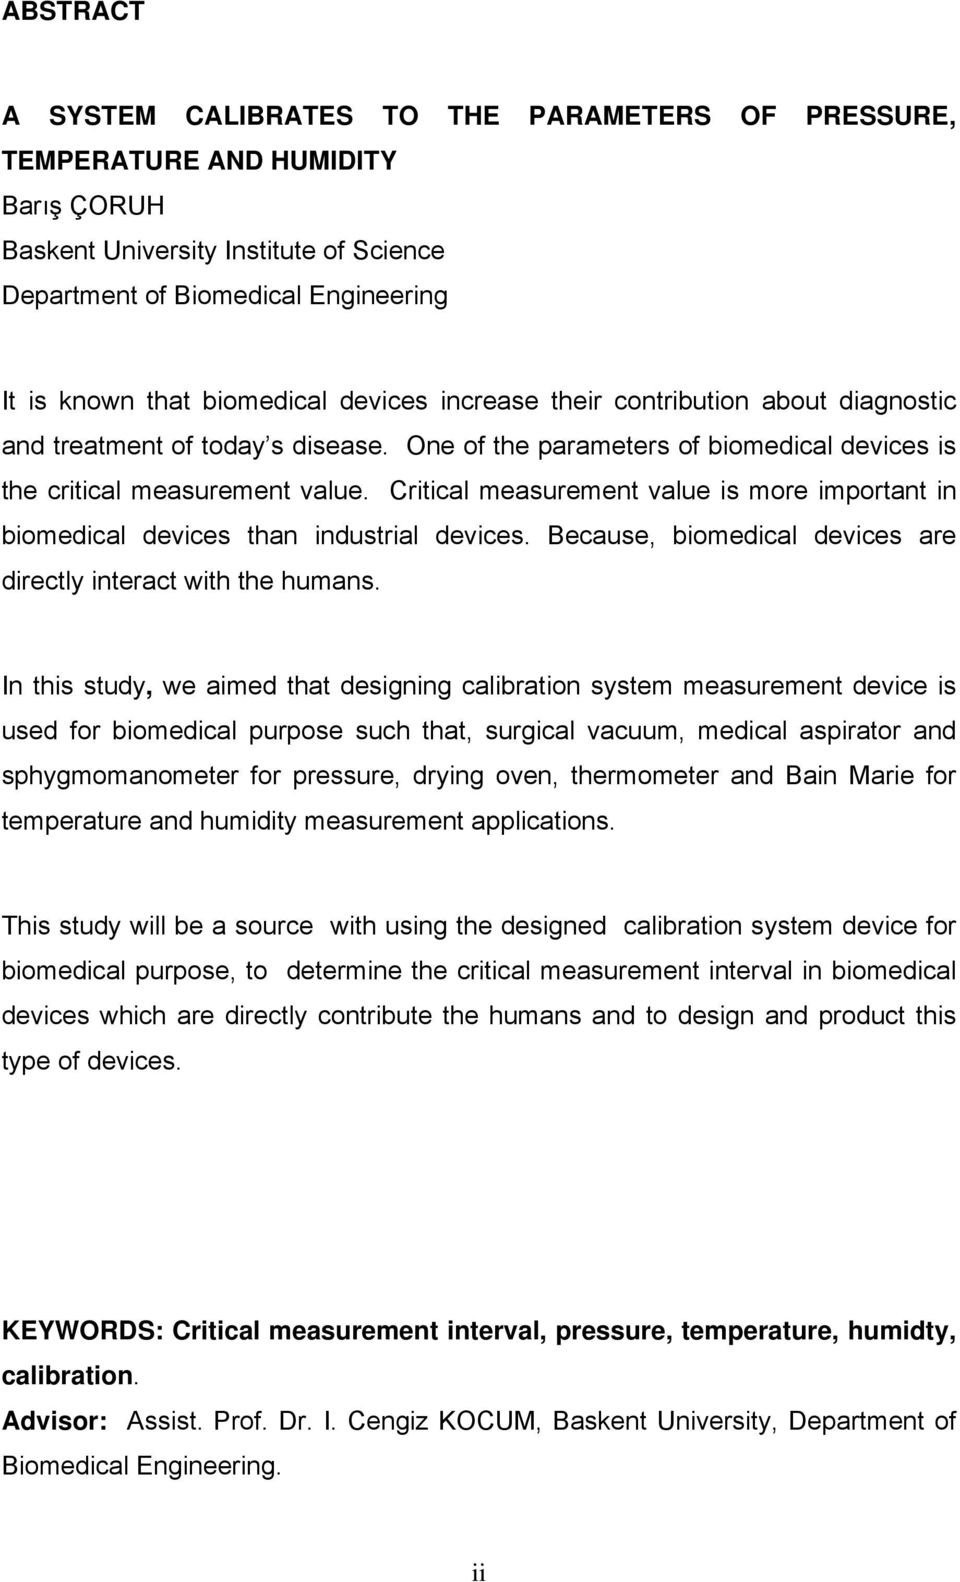 Critical measurement value is more important in biomedical devices than industrial devices. Because, biomedical devices are directly interact with the humans.